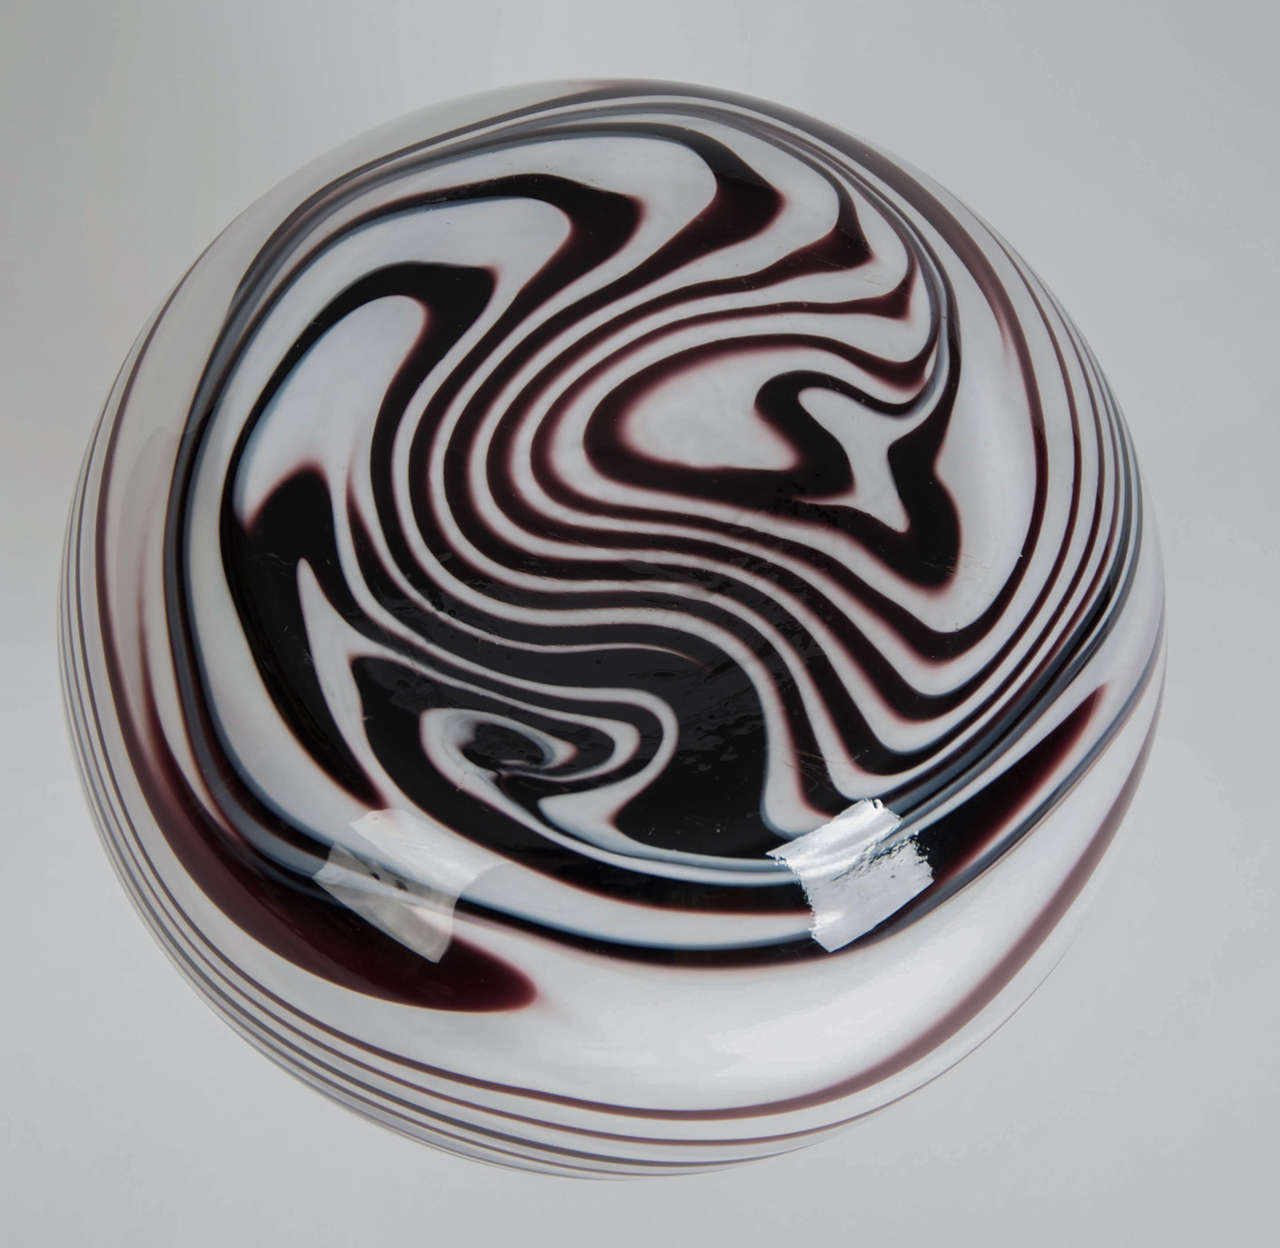 Vintage 1970s Carlo Moretti Maroon & White Wave Glass Vase In Good Condition For Sale In London, GB